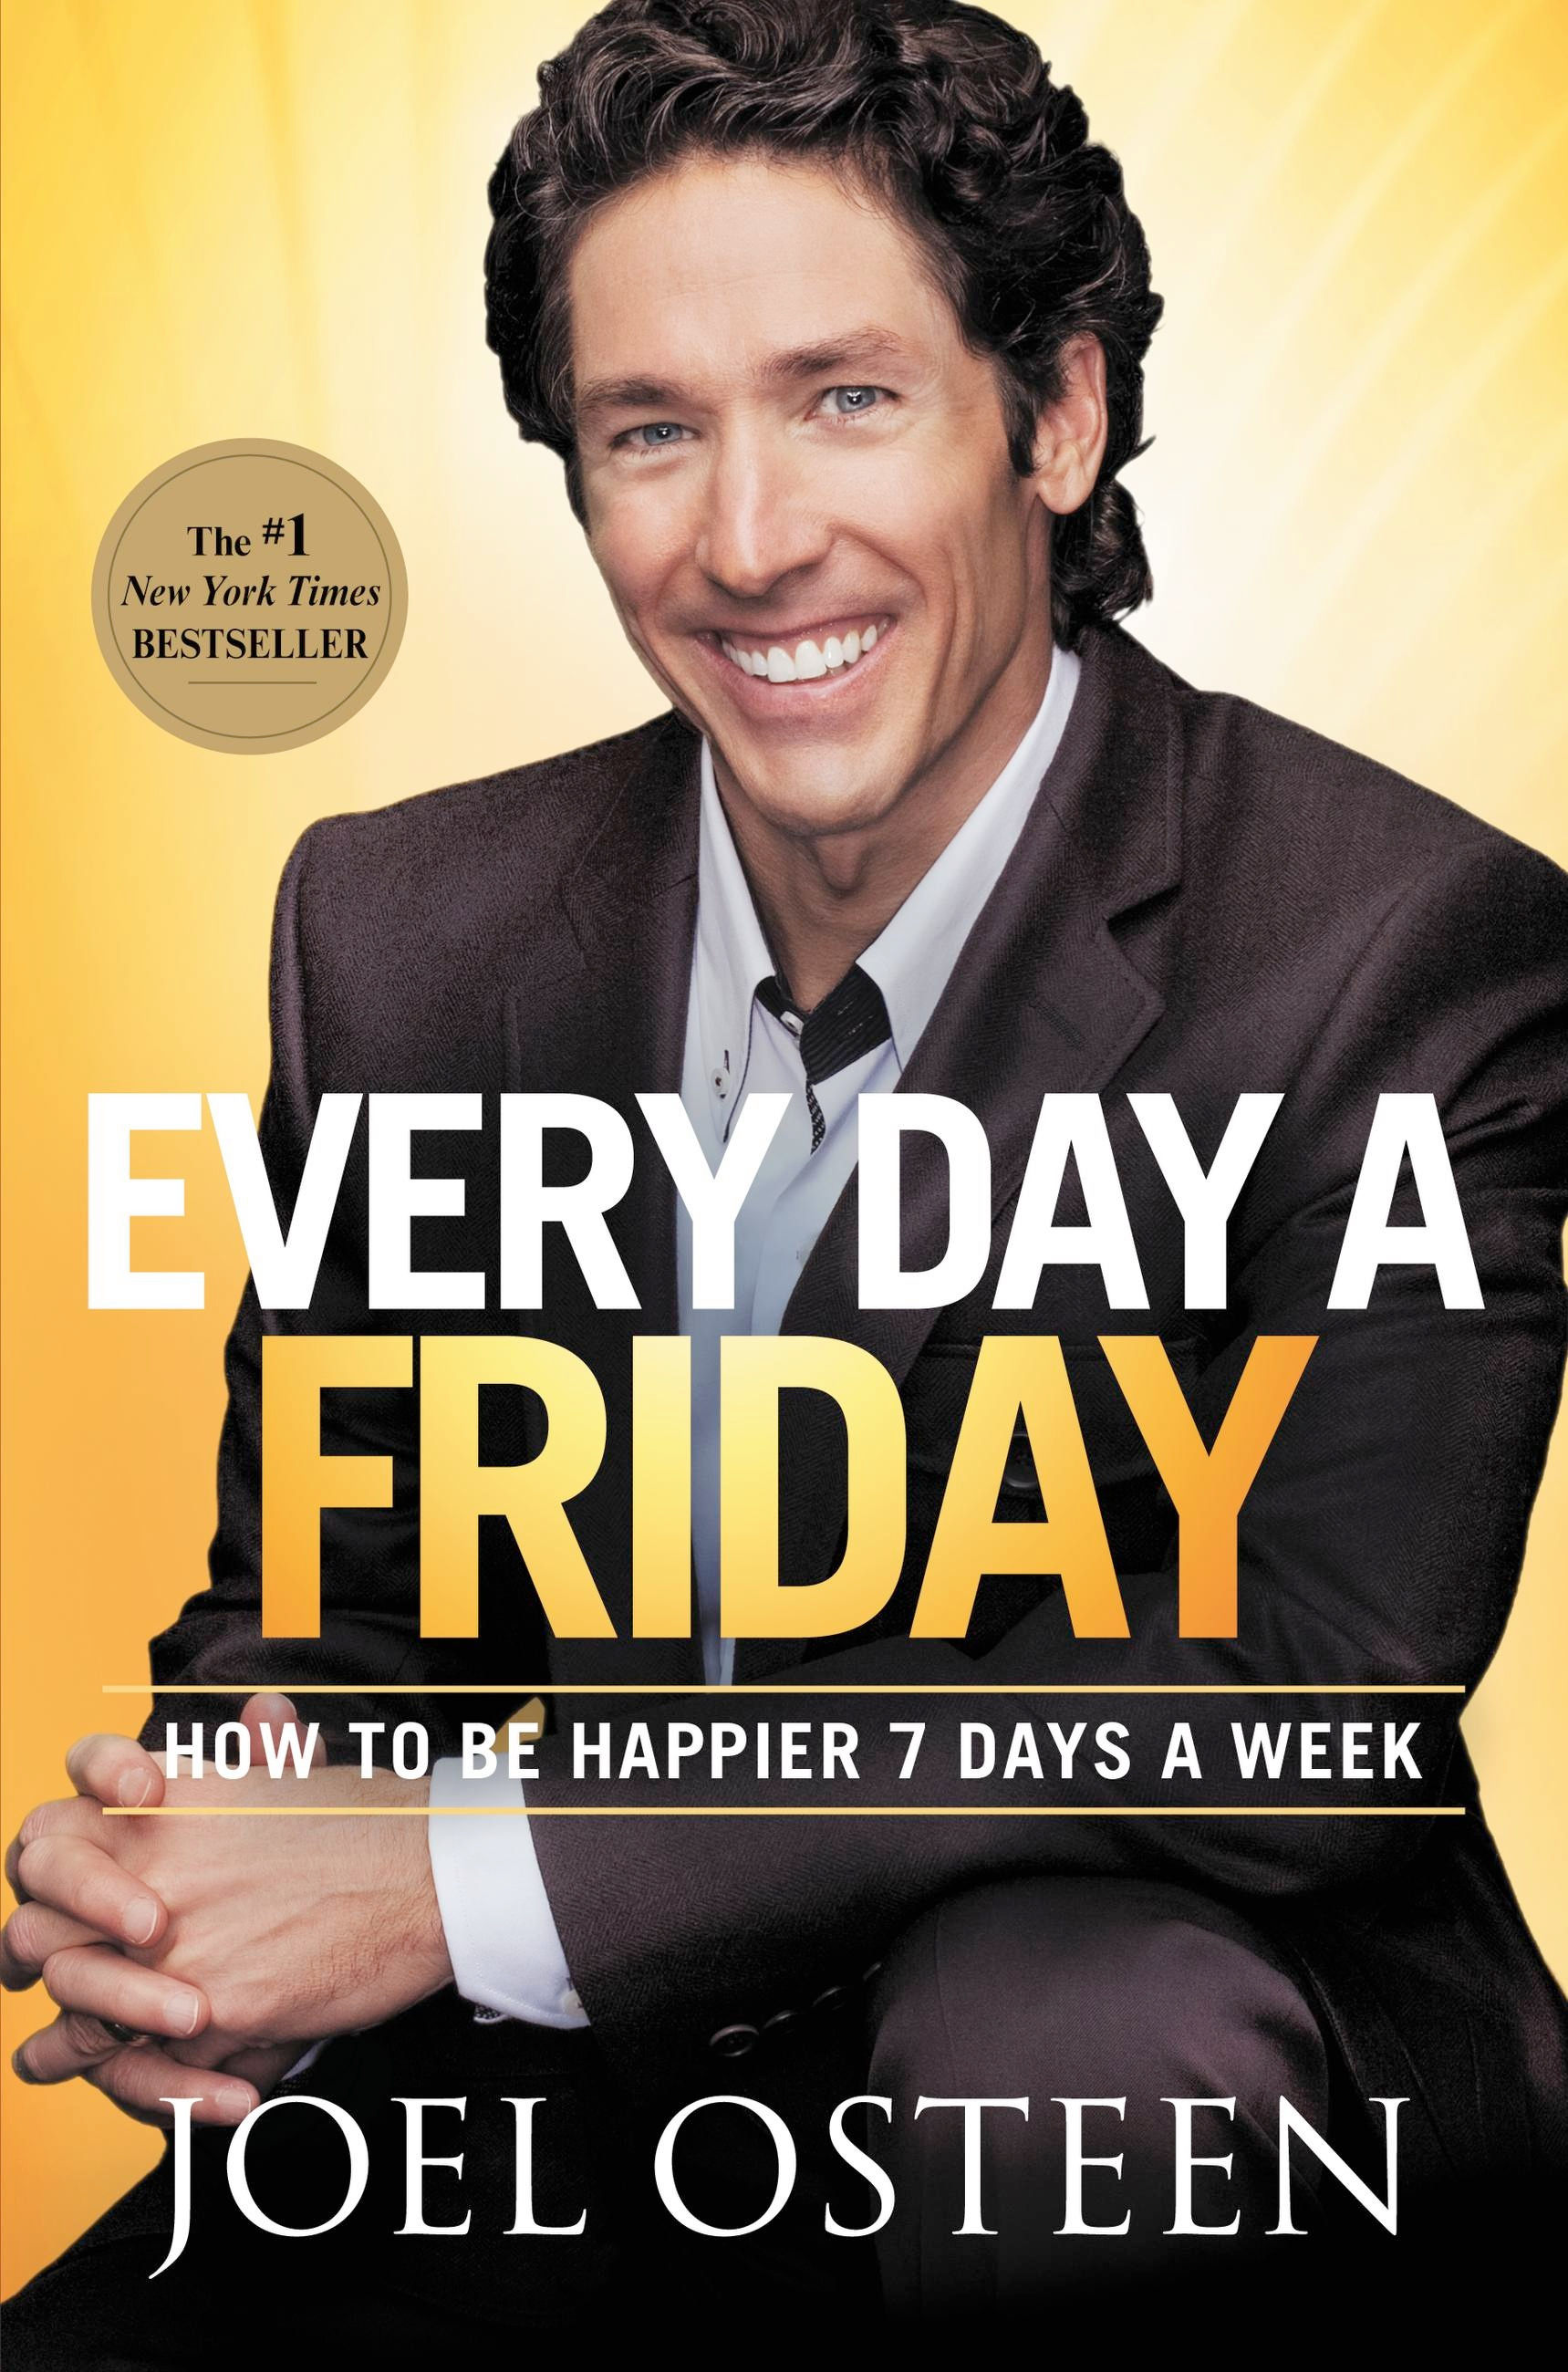 9. 'Every Day a Friday : How to Be Happier 7 Days a Week' by Joel Osteen